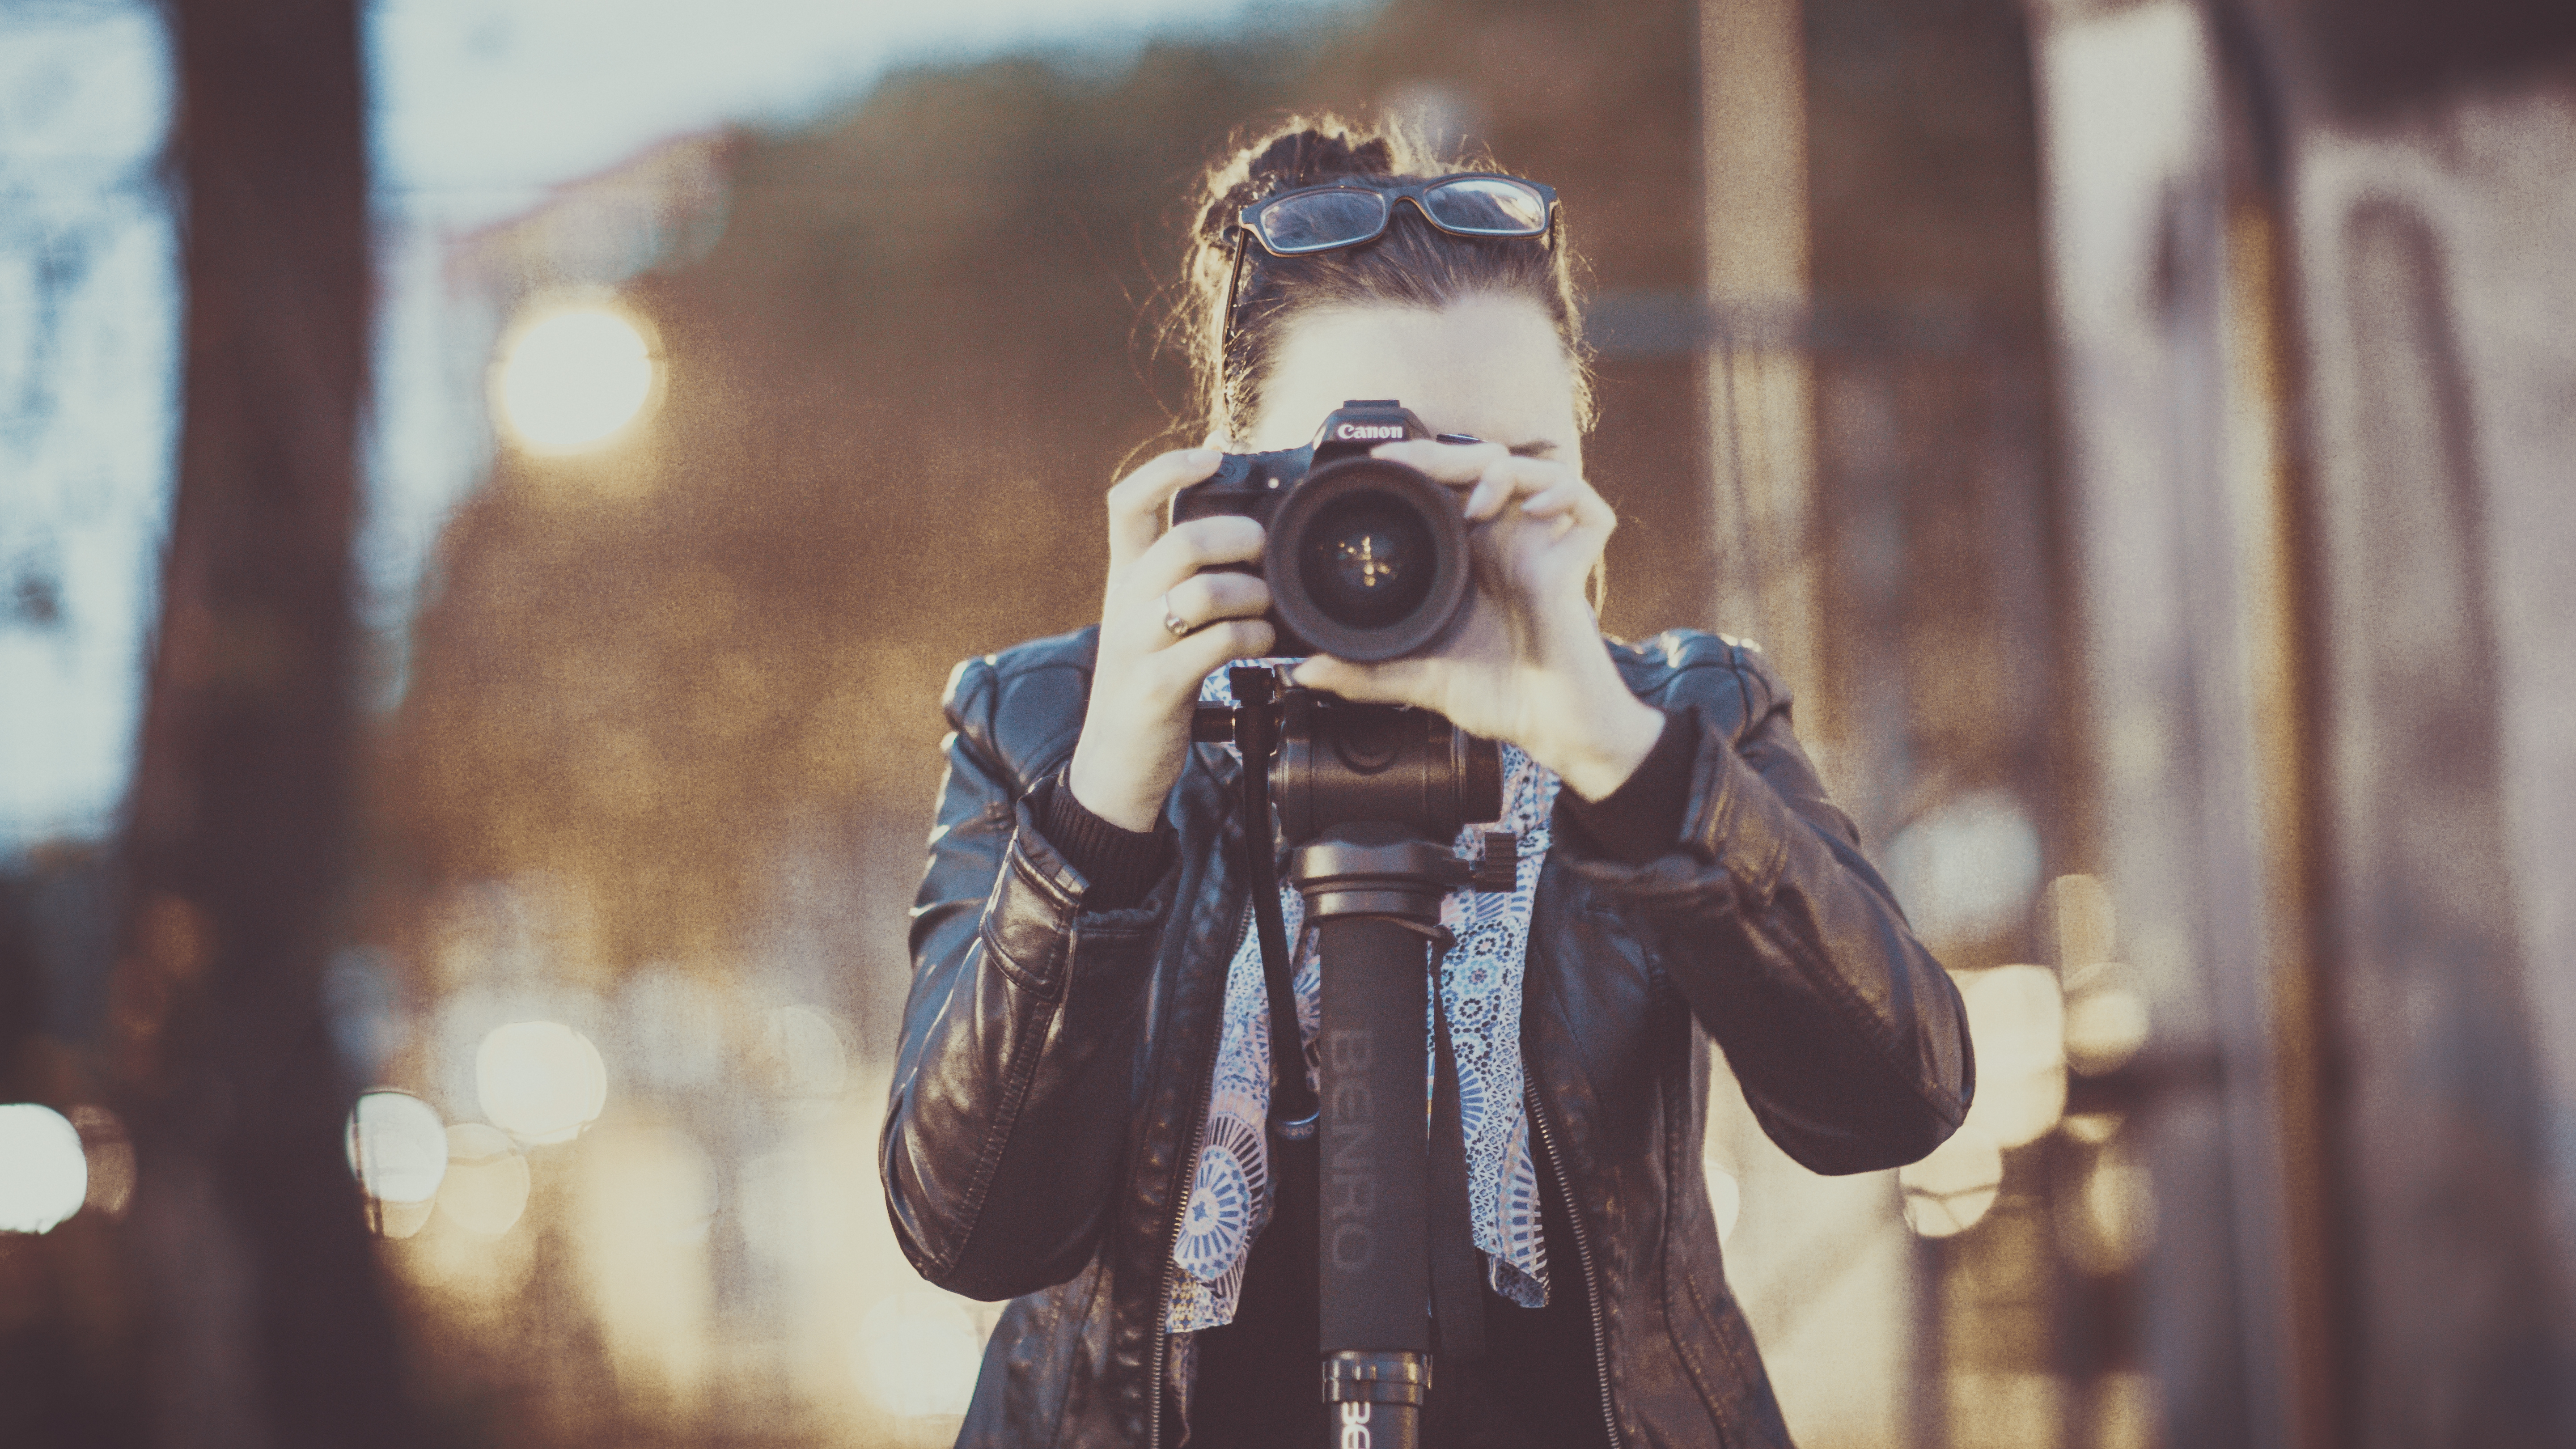 How To Become A Fashion Photographer?